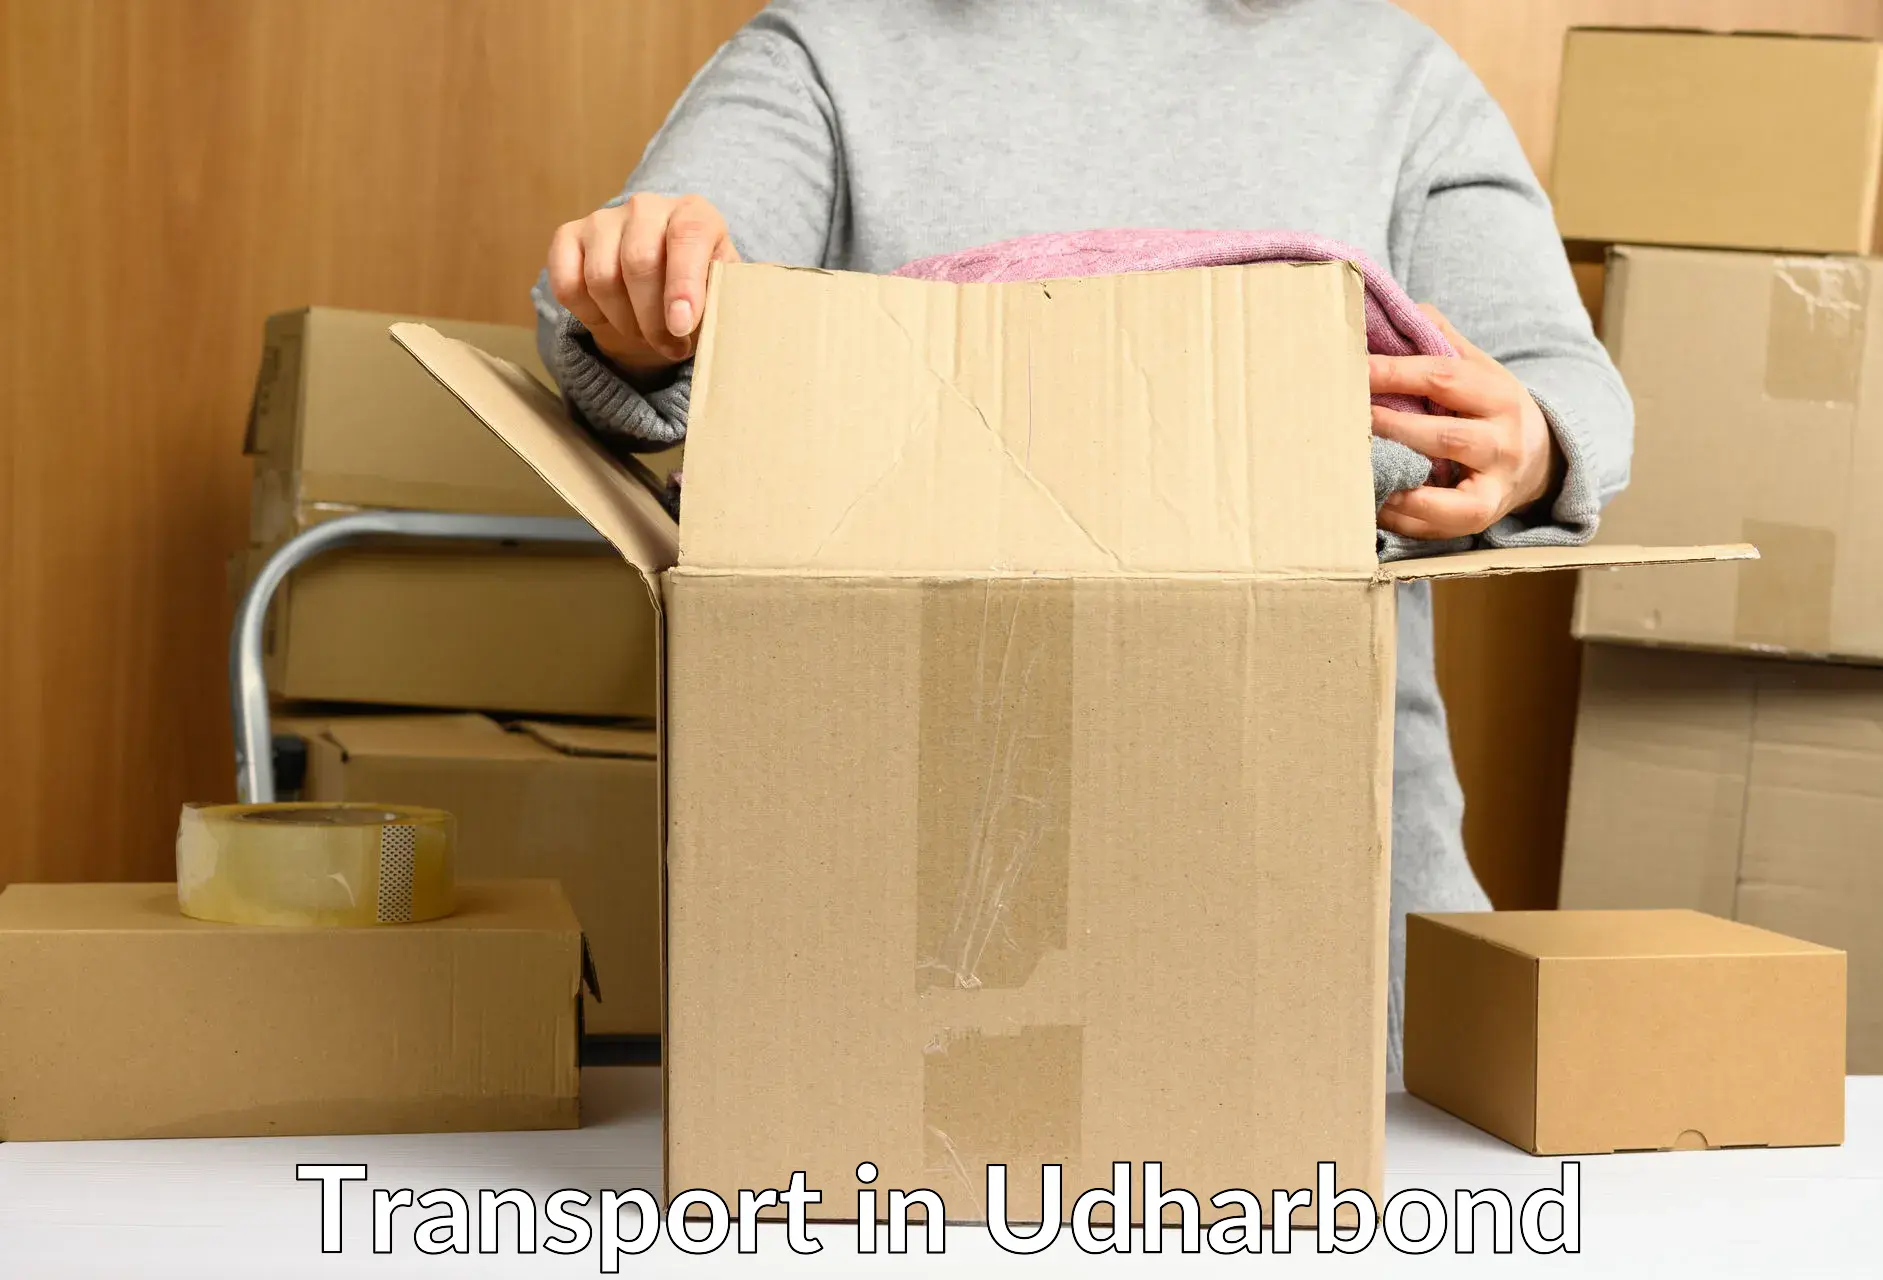 Lorry transport service in Udharbond